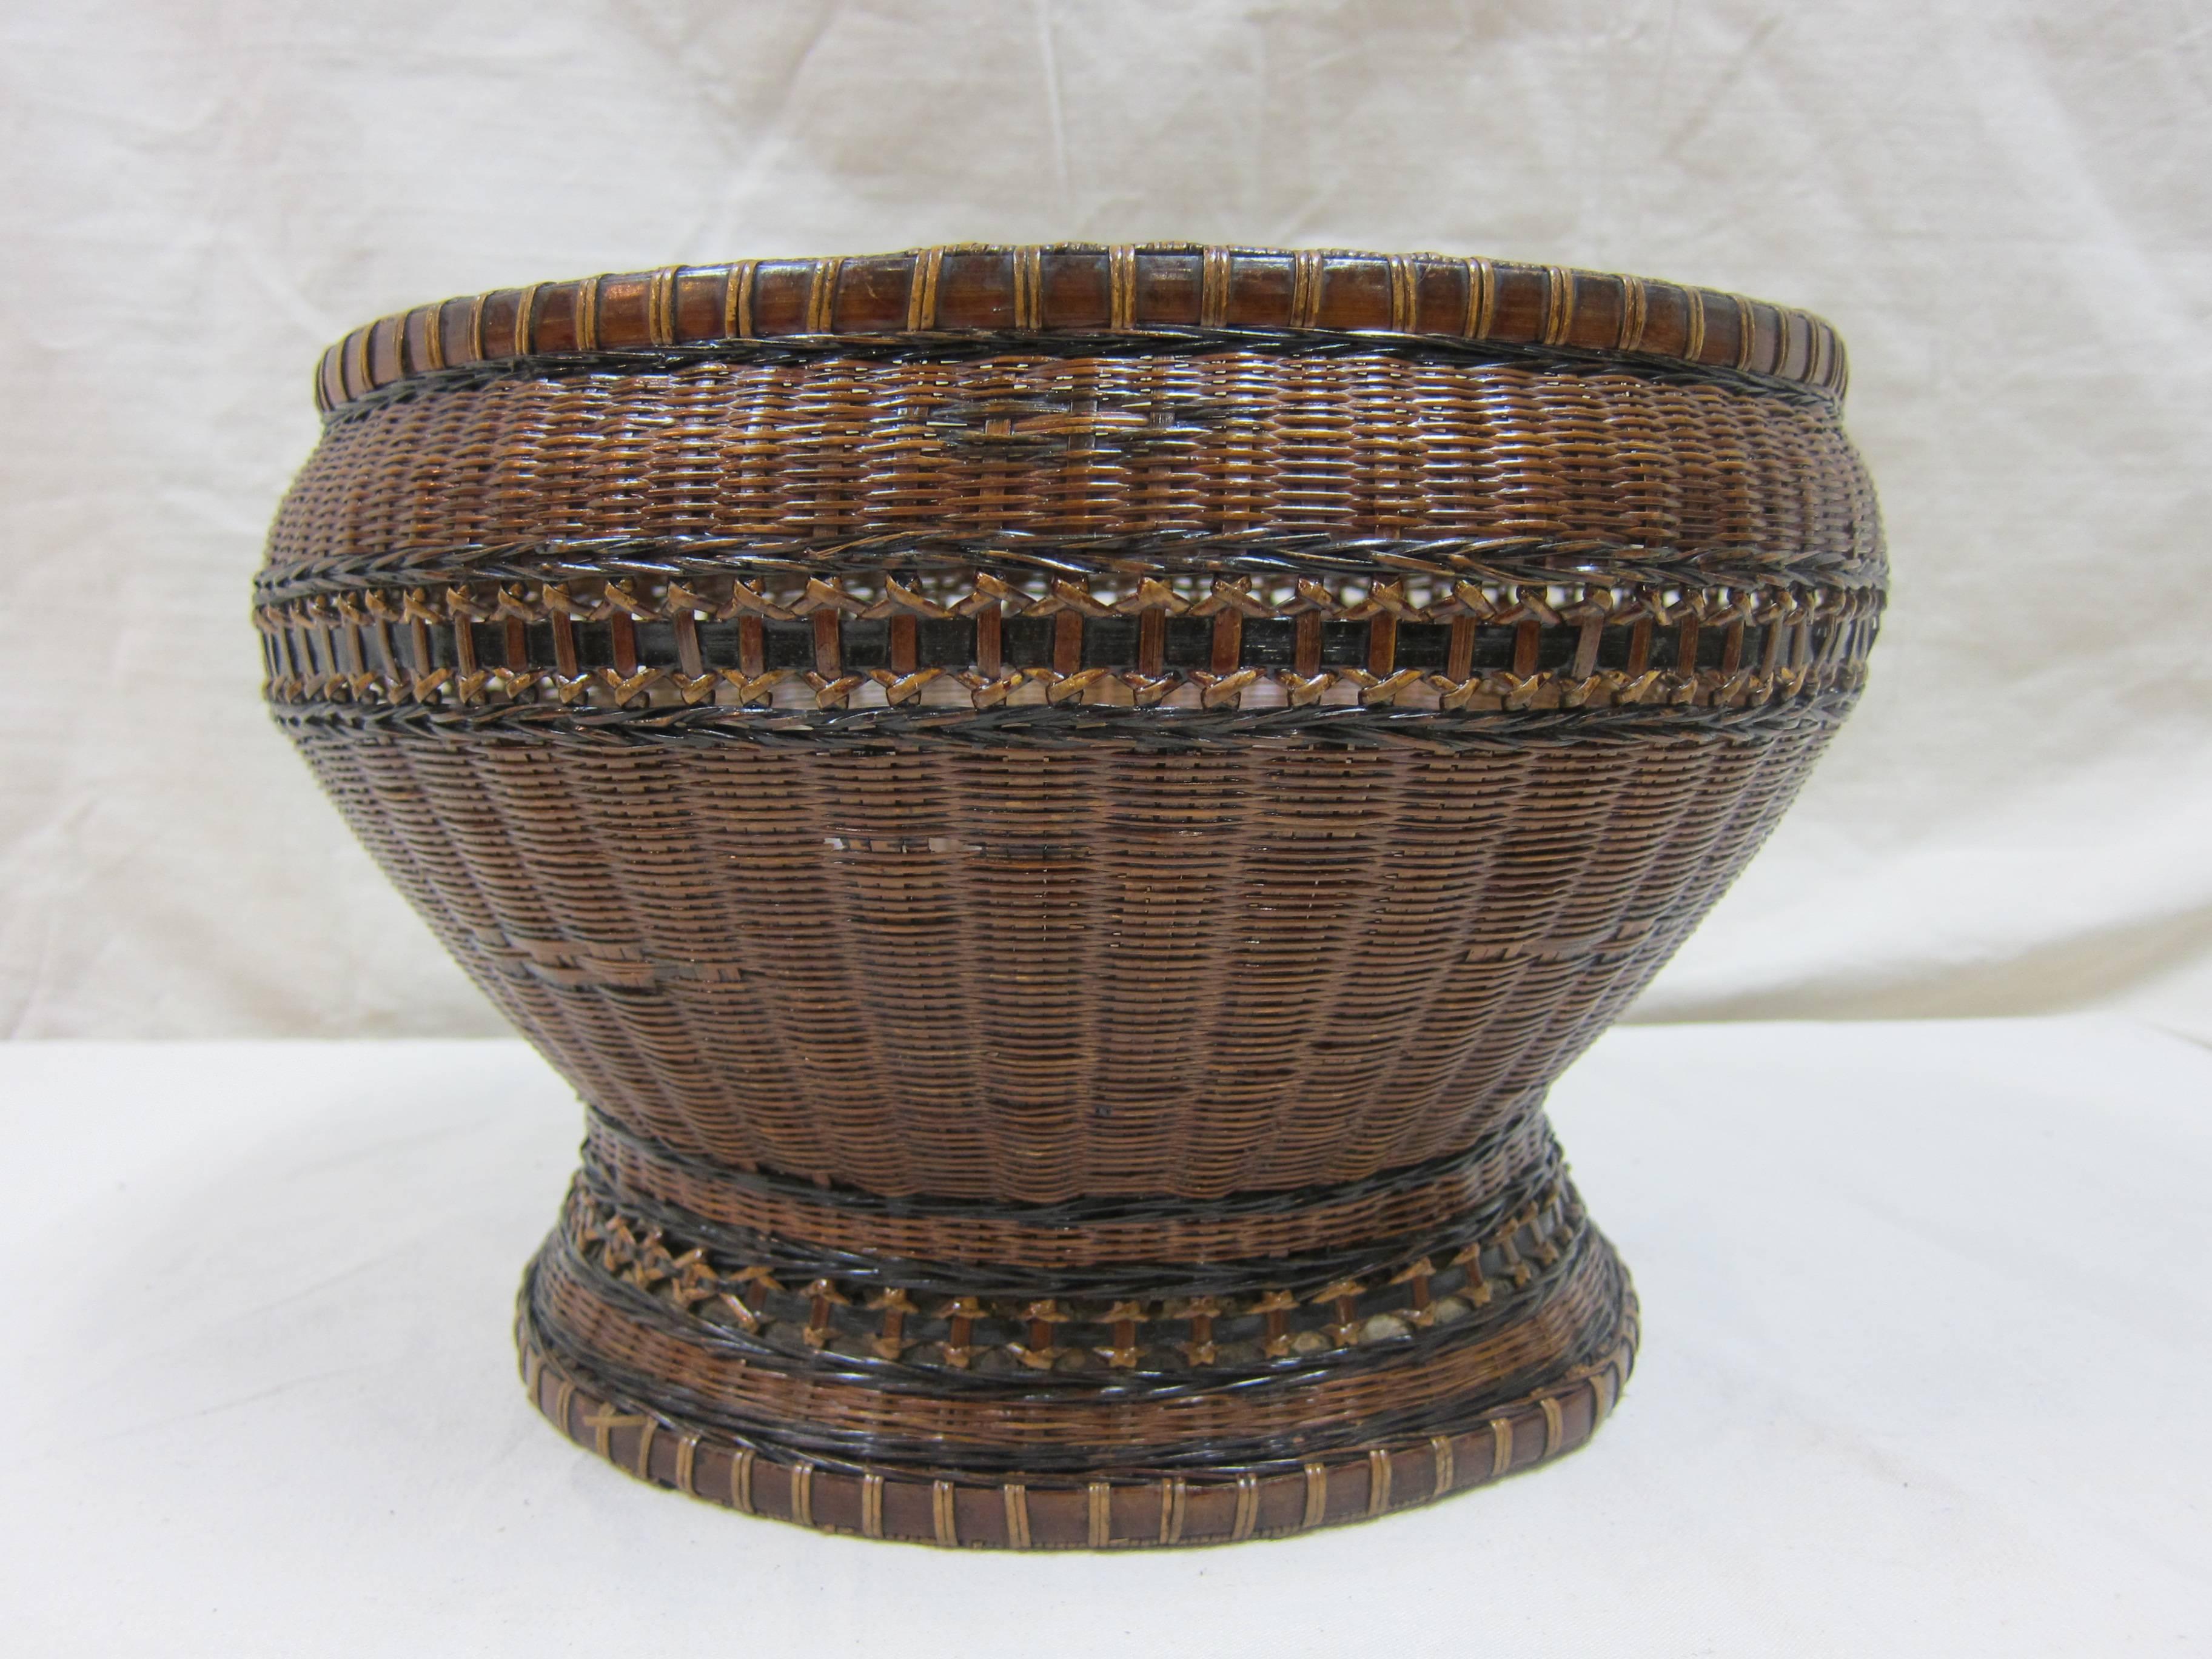 Antique Basket Bowl.  Woven basketry bowl of rattan, reed and bamboo. Very good condition and very usable. Interesting Honeycomb pattern to inside base. Excellent for collection, display or every day use fruit and vegetables. 
Looks beautiful on a